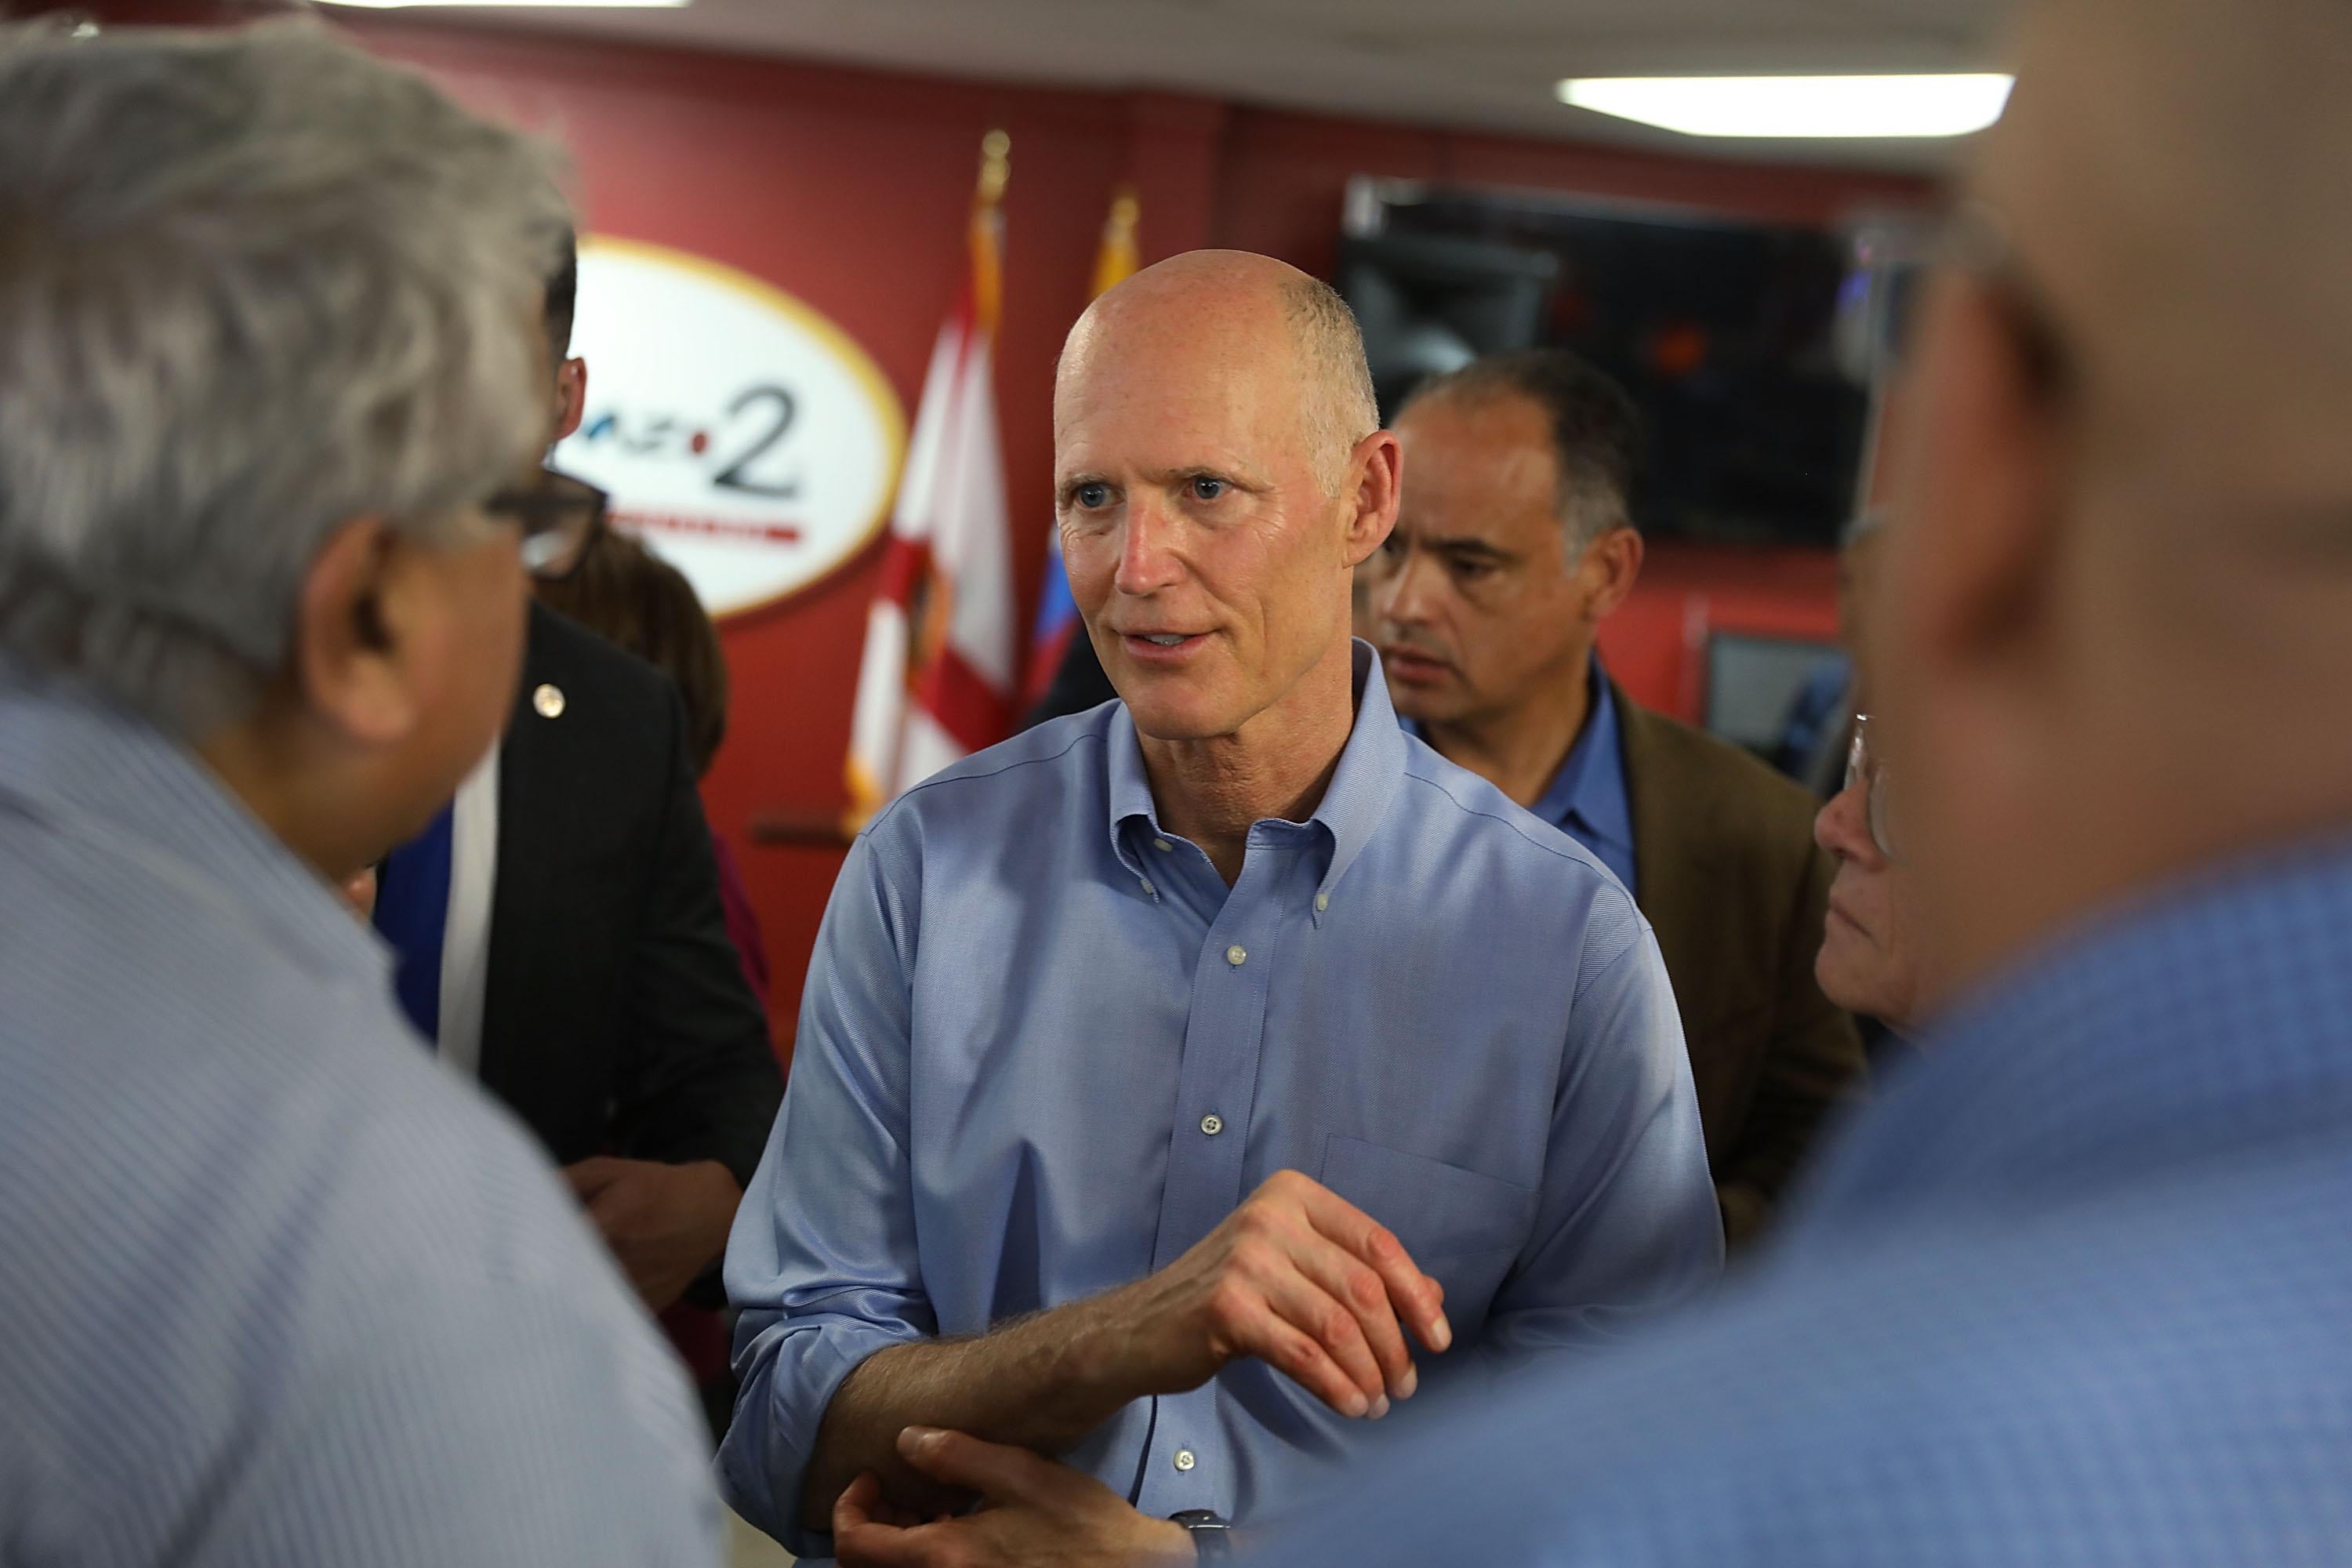 DORAL, FL - MARCH 28:  Florida Governor Rick Scott interacts with people at Restaurant El Arepazo 2 as he holds a bill signing ceremony for legislation to prohibit all state agencies from doing business with any entity that benefits the Venezuelan regime on March 28, 2018 in Doral, Florida. Gov. Scott said recently that he will have a big announcement on April 9, with many speculating that he will launch a Senate bid to challenge incumbent Democratic Sen. Bill Nelson for the seat.  (Photo by Joe Raedle/Getty Images)